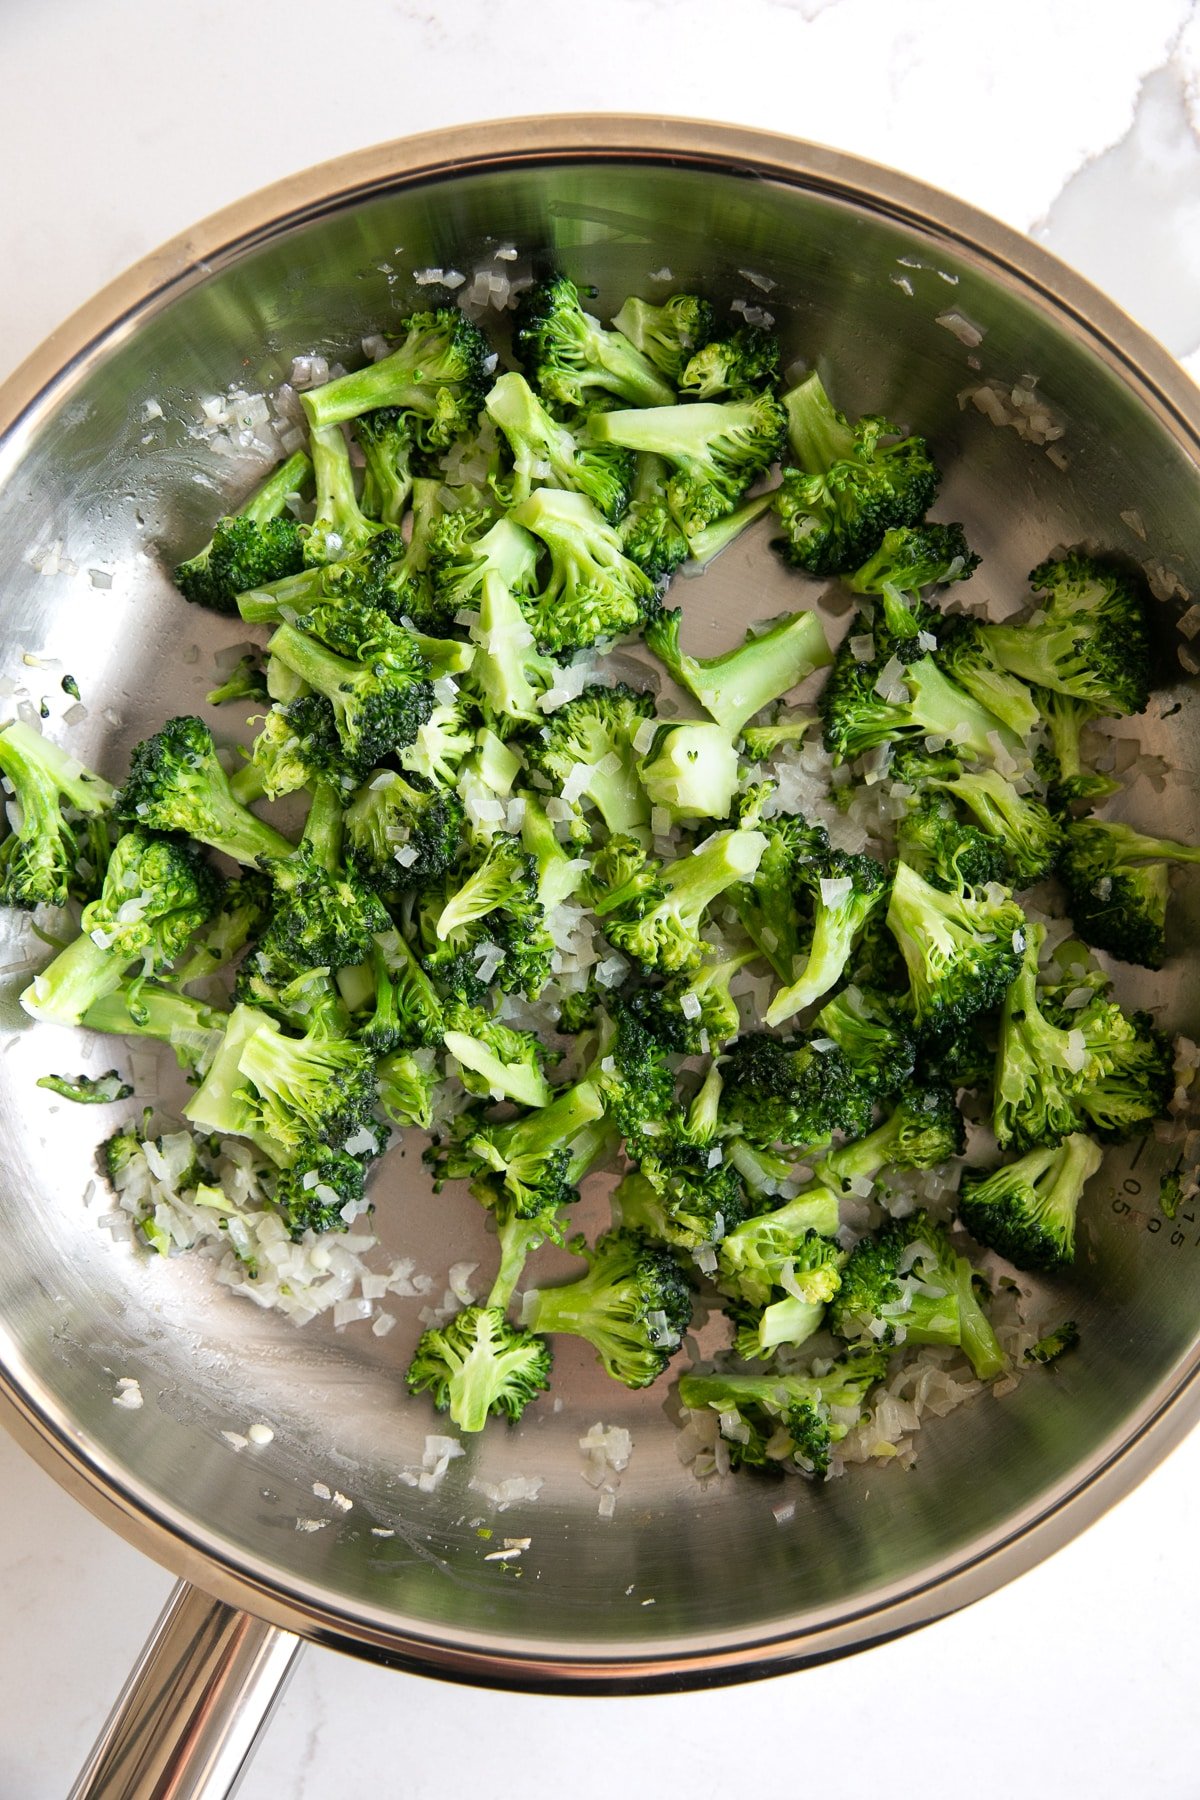 Image of a stainless steel skillet filled with sauteed shallots, garlic, and broccoli florets.